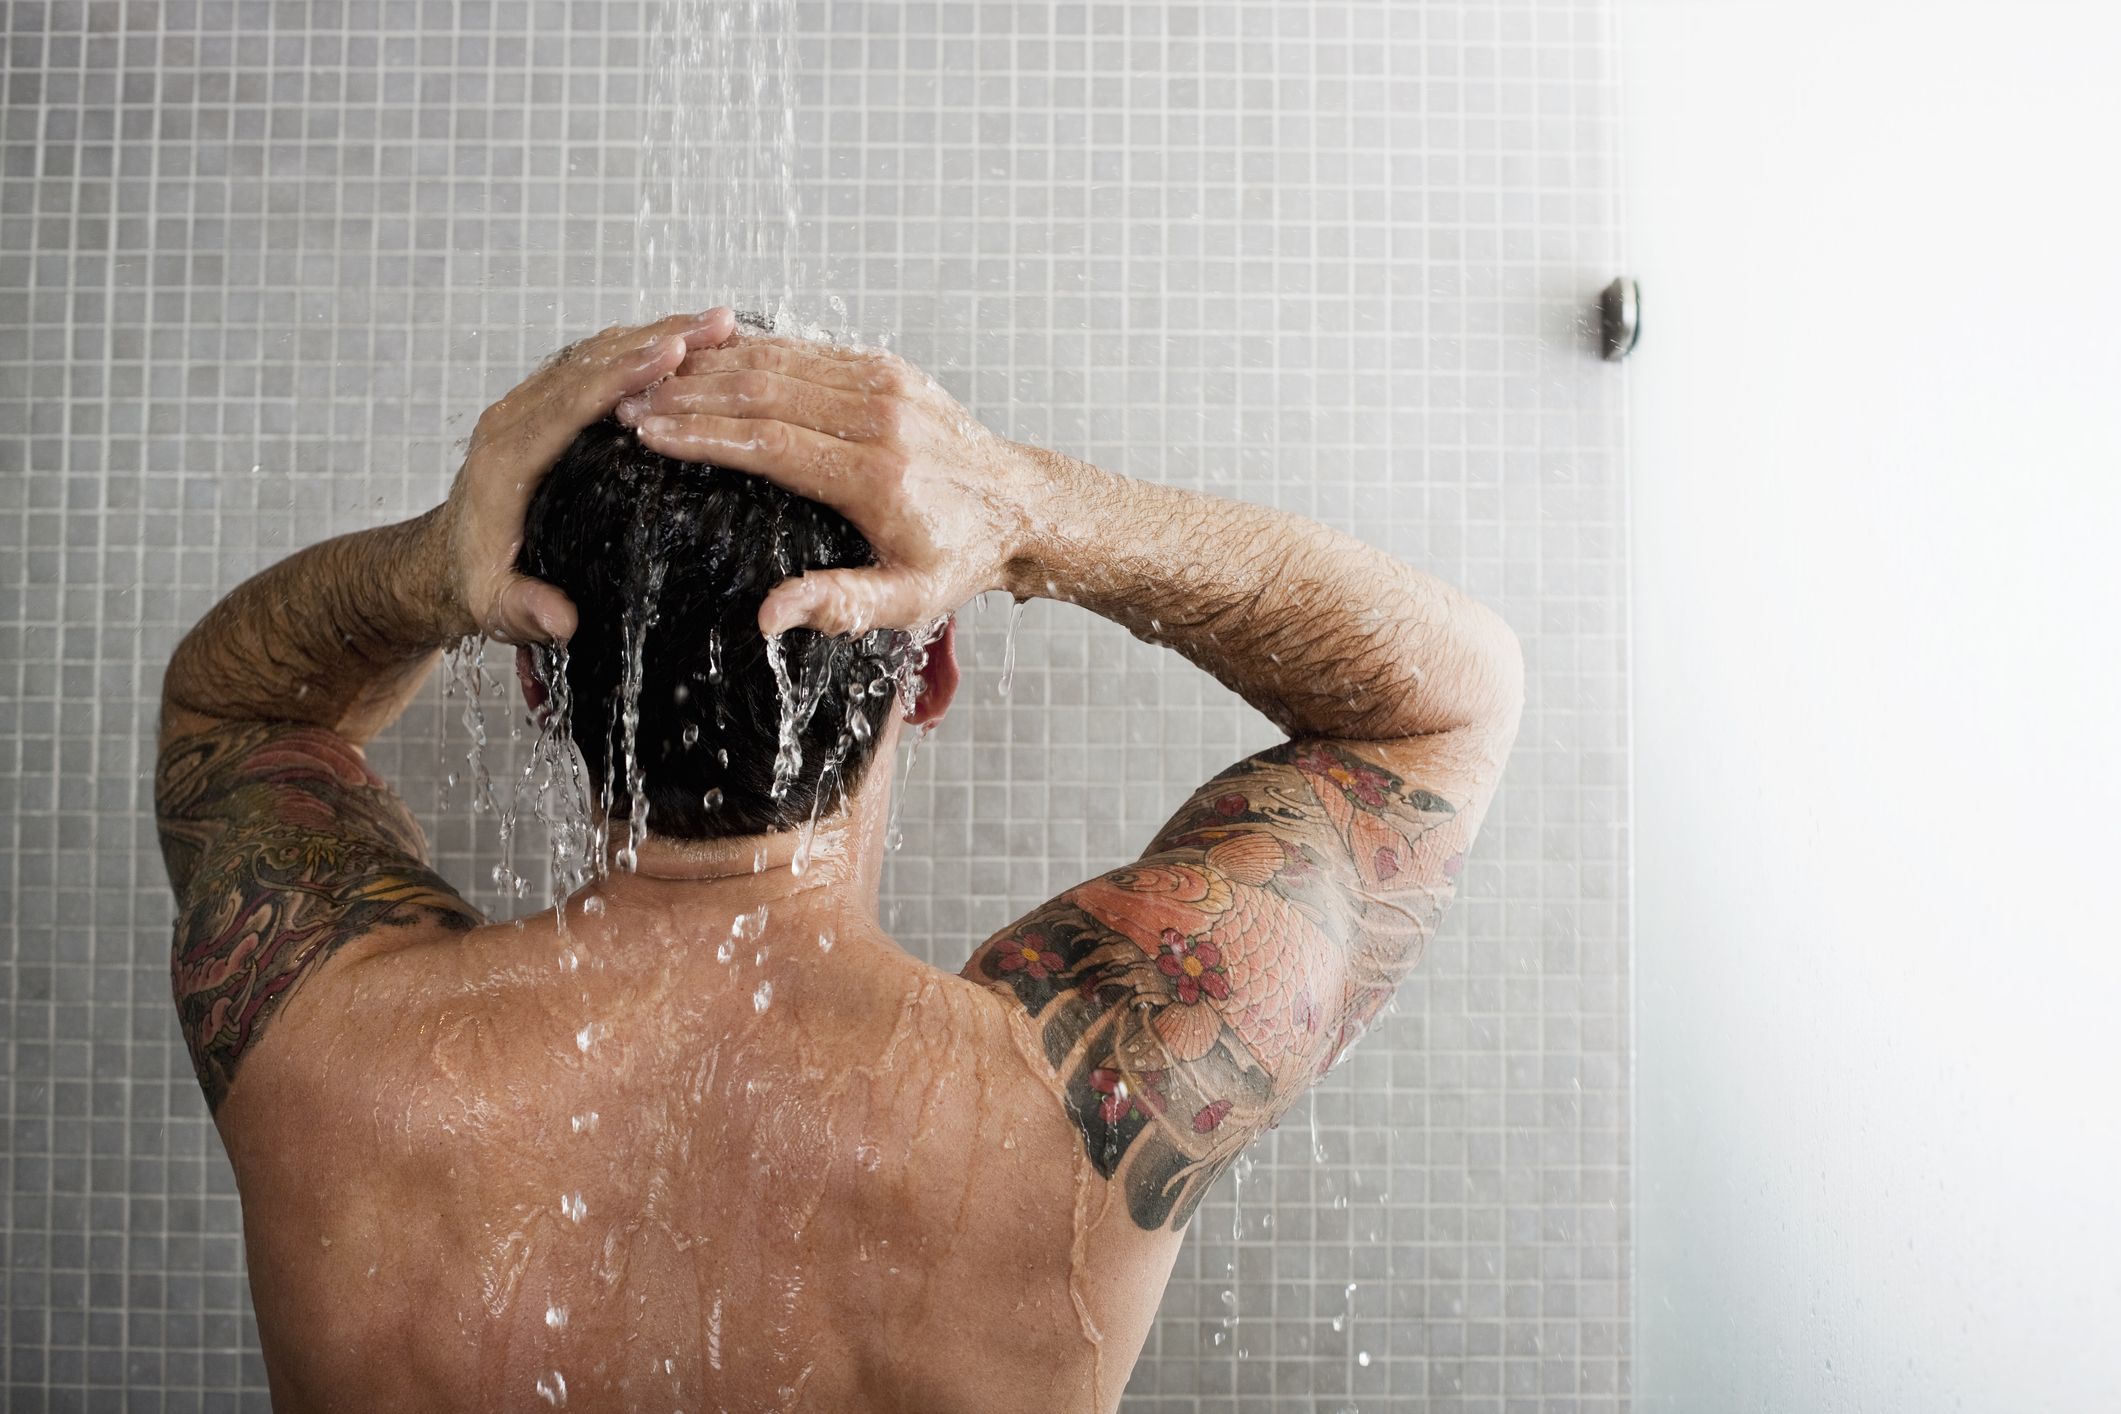 Daily use shampoos for men who shower every day